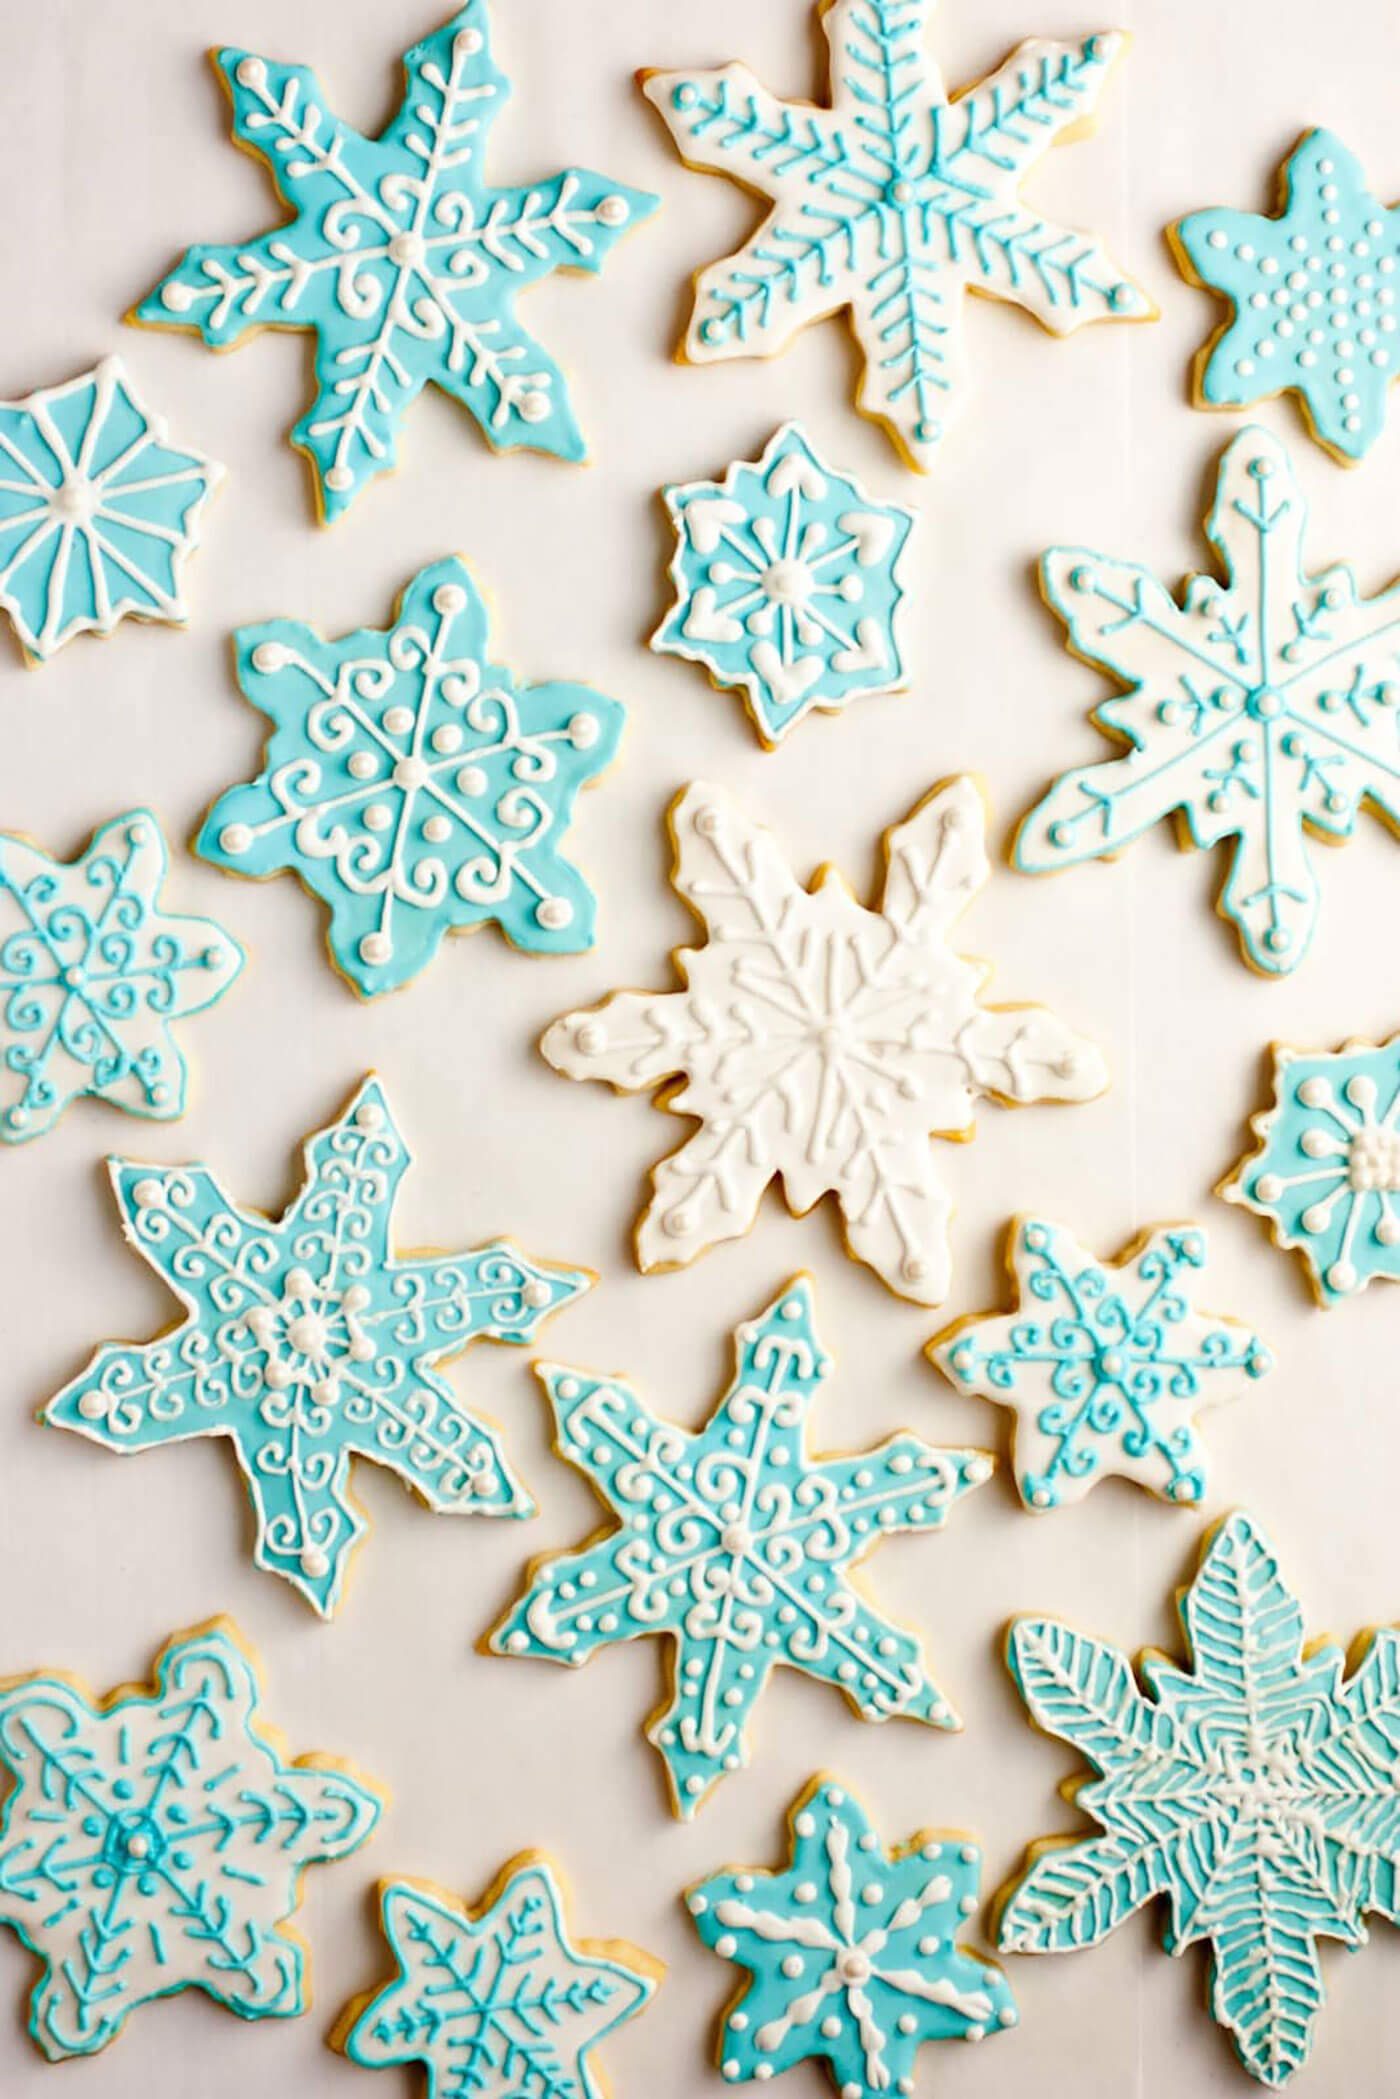 Iced sugar cookies in delicate baby blue and white frosting swirls